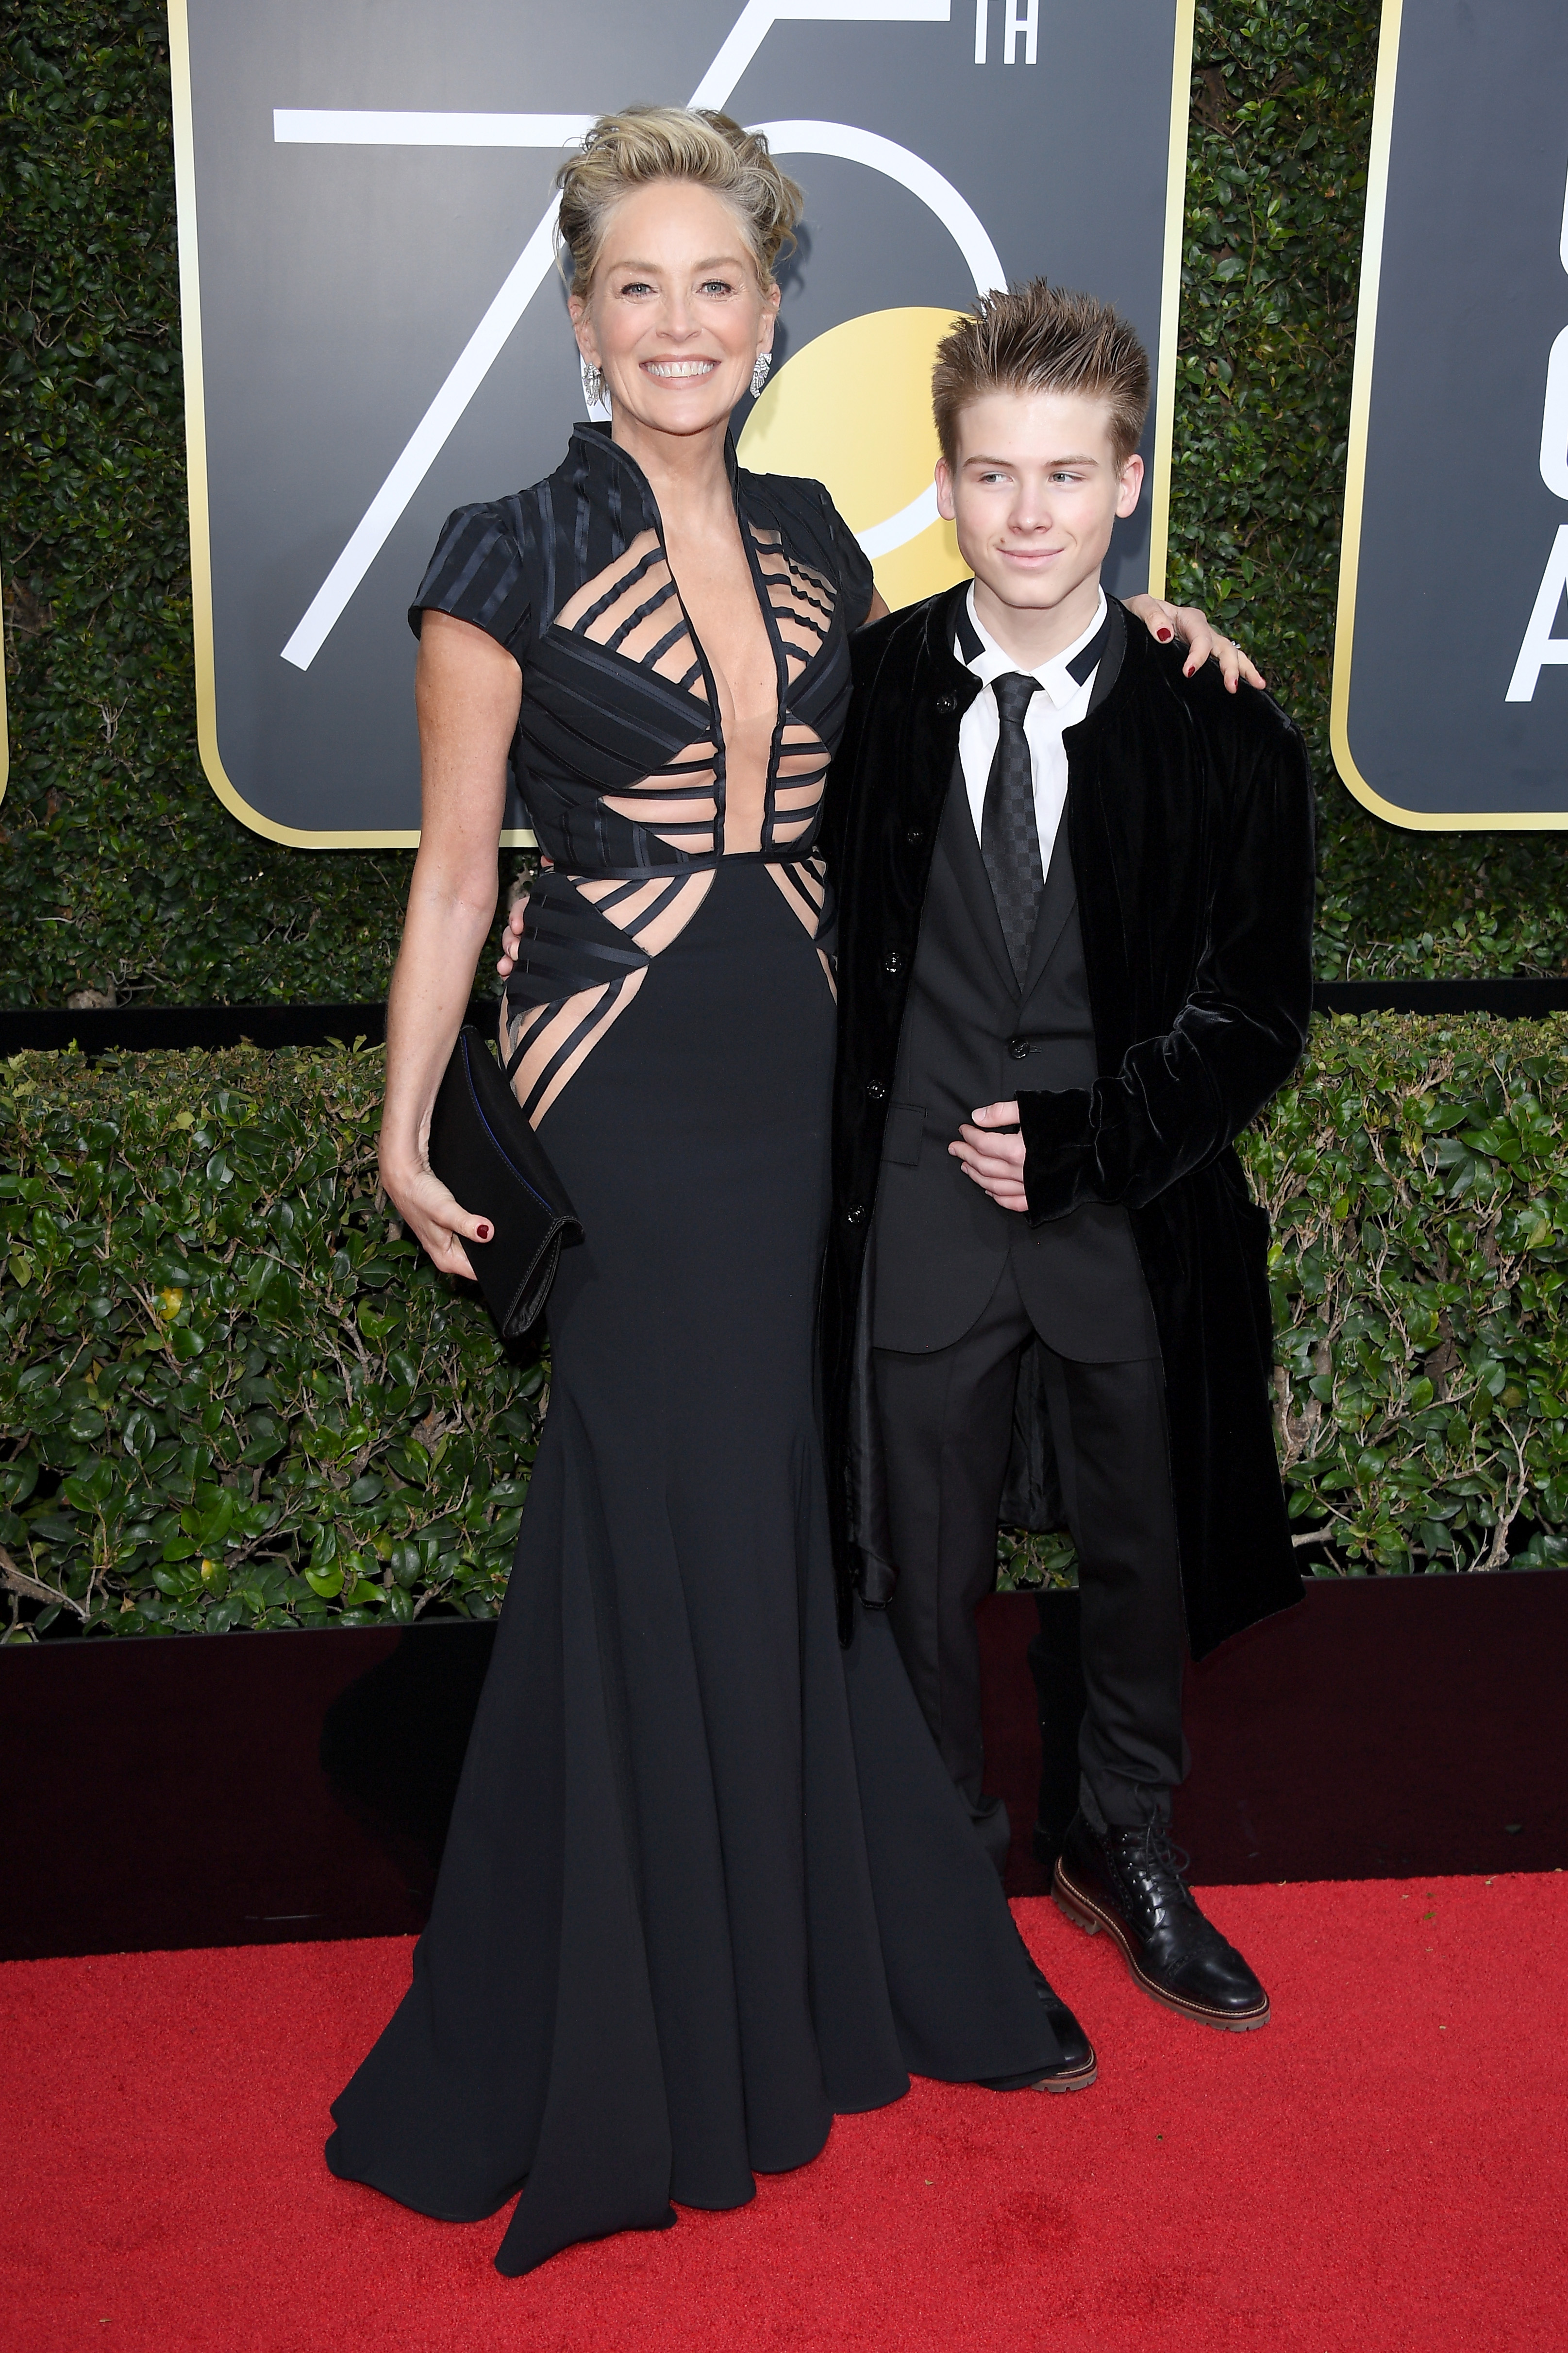 Sharon Stone and son, Roan Joseph Bronstein attend The 75th Annual Golden Globe Awards at The Beverly Hilton Hotel, on January 7, 2018, in Beverly Hills, California. | Source: Getty Images